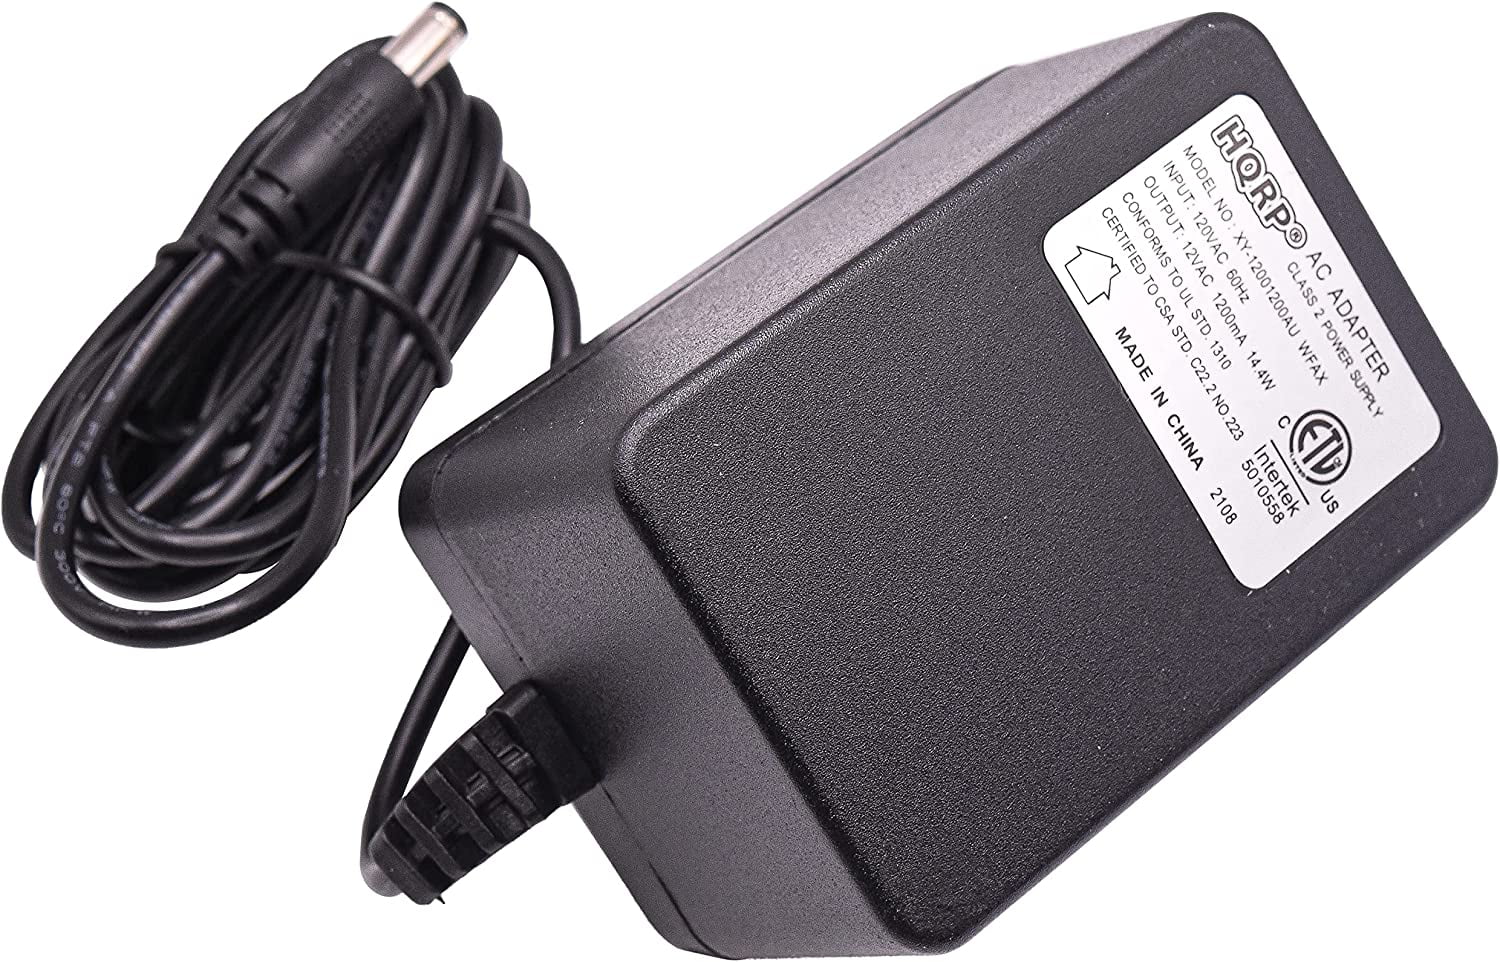 HQRP AC Adapter for Aphex Xciter Aural Exciter Guitar & Bass Pedal